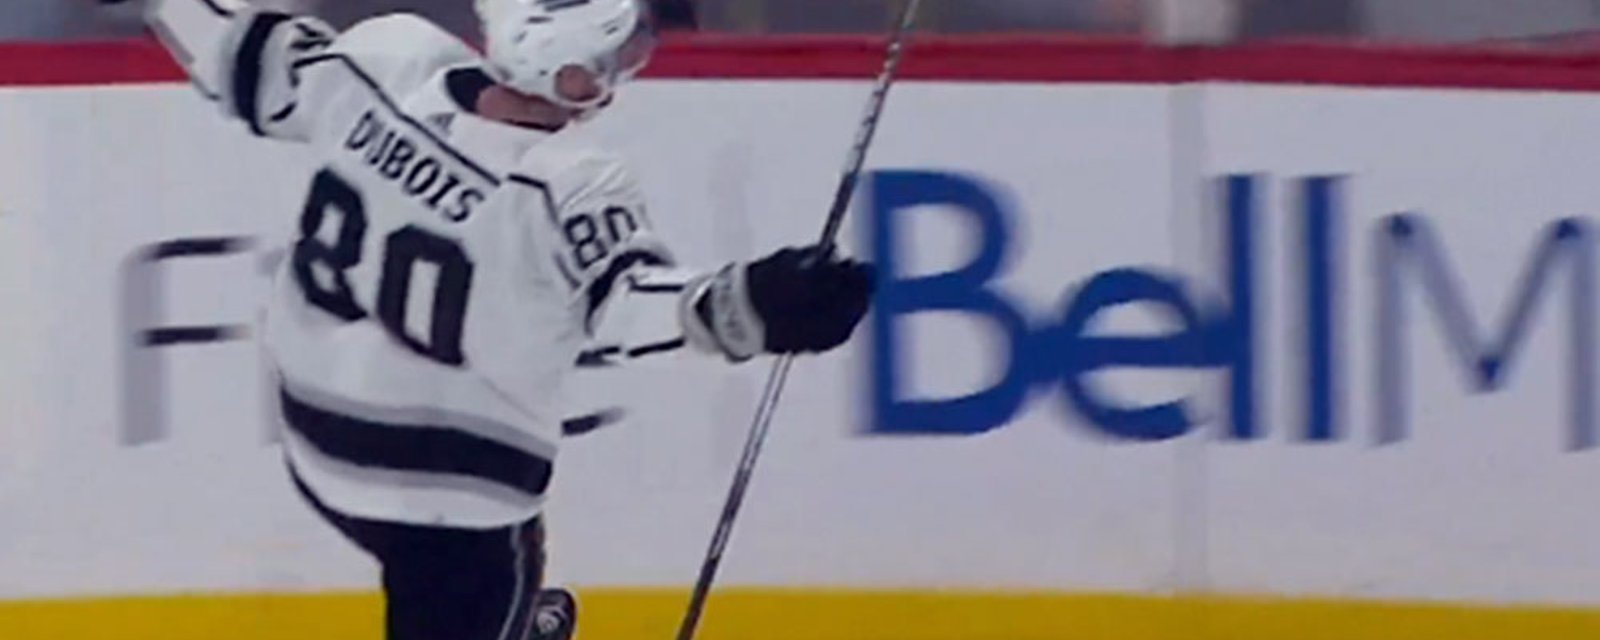 Pierre-Luc Dubois scores his first as a King... against the Jets in Winnipeg!